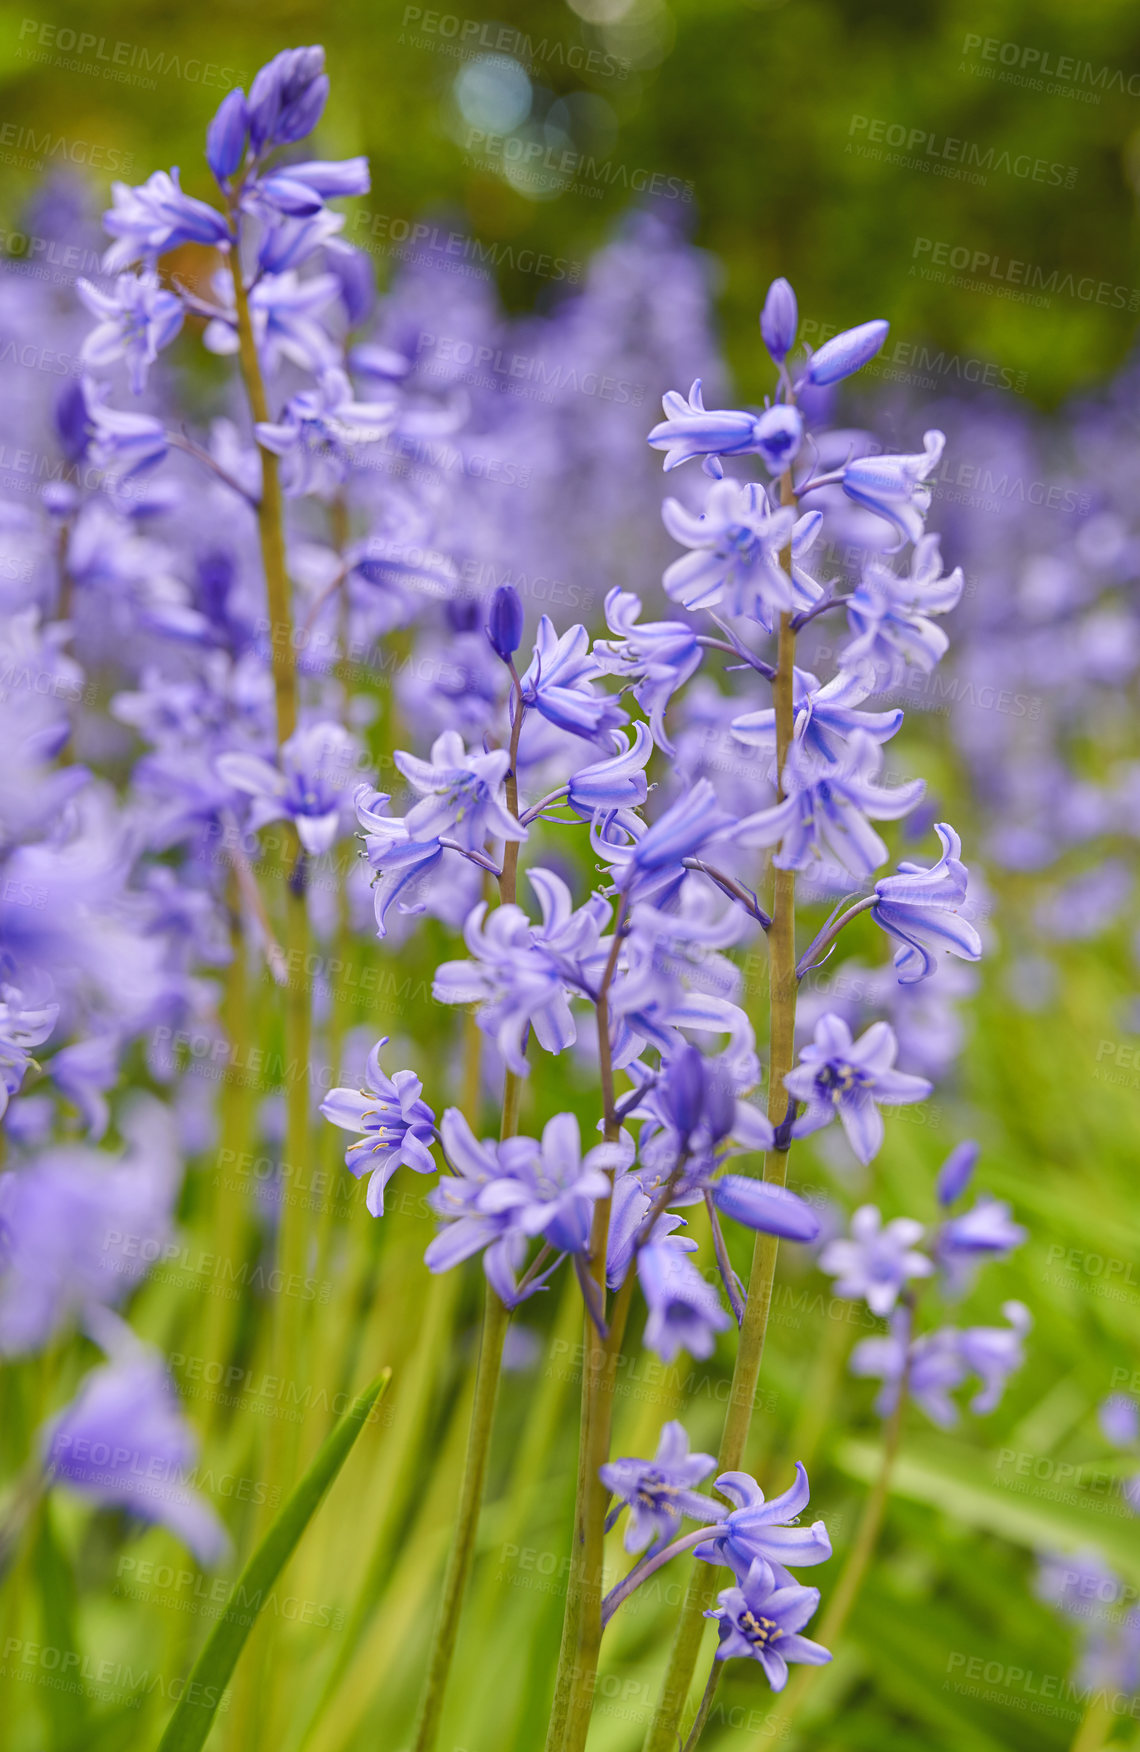 Buy stock photo Scilla siberica close up of purple flowers. Wild bluebell blooming in a spring forest. Macro shot of a bunch of violet blossoms with green grass showing in blurred background. 